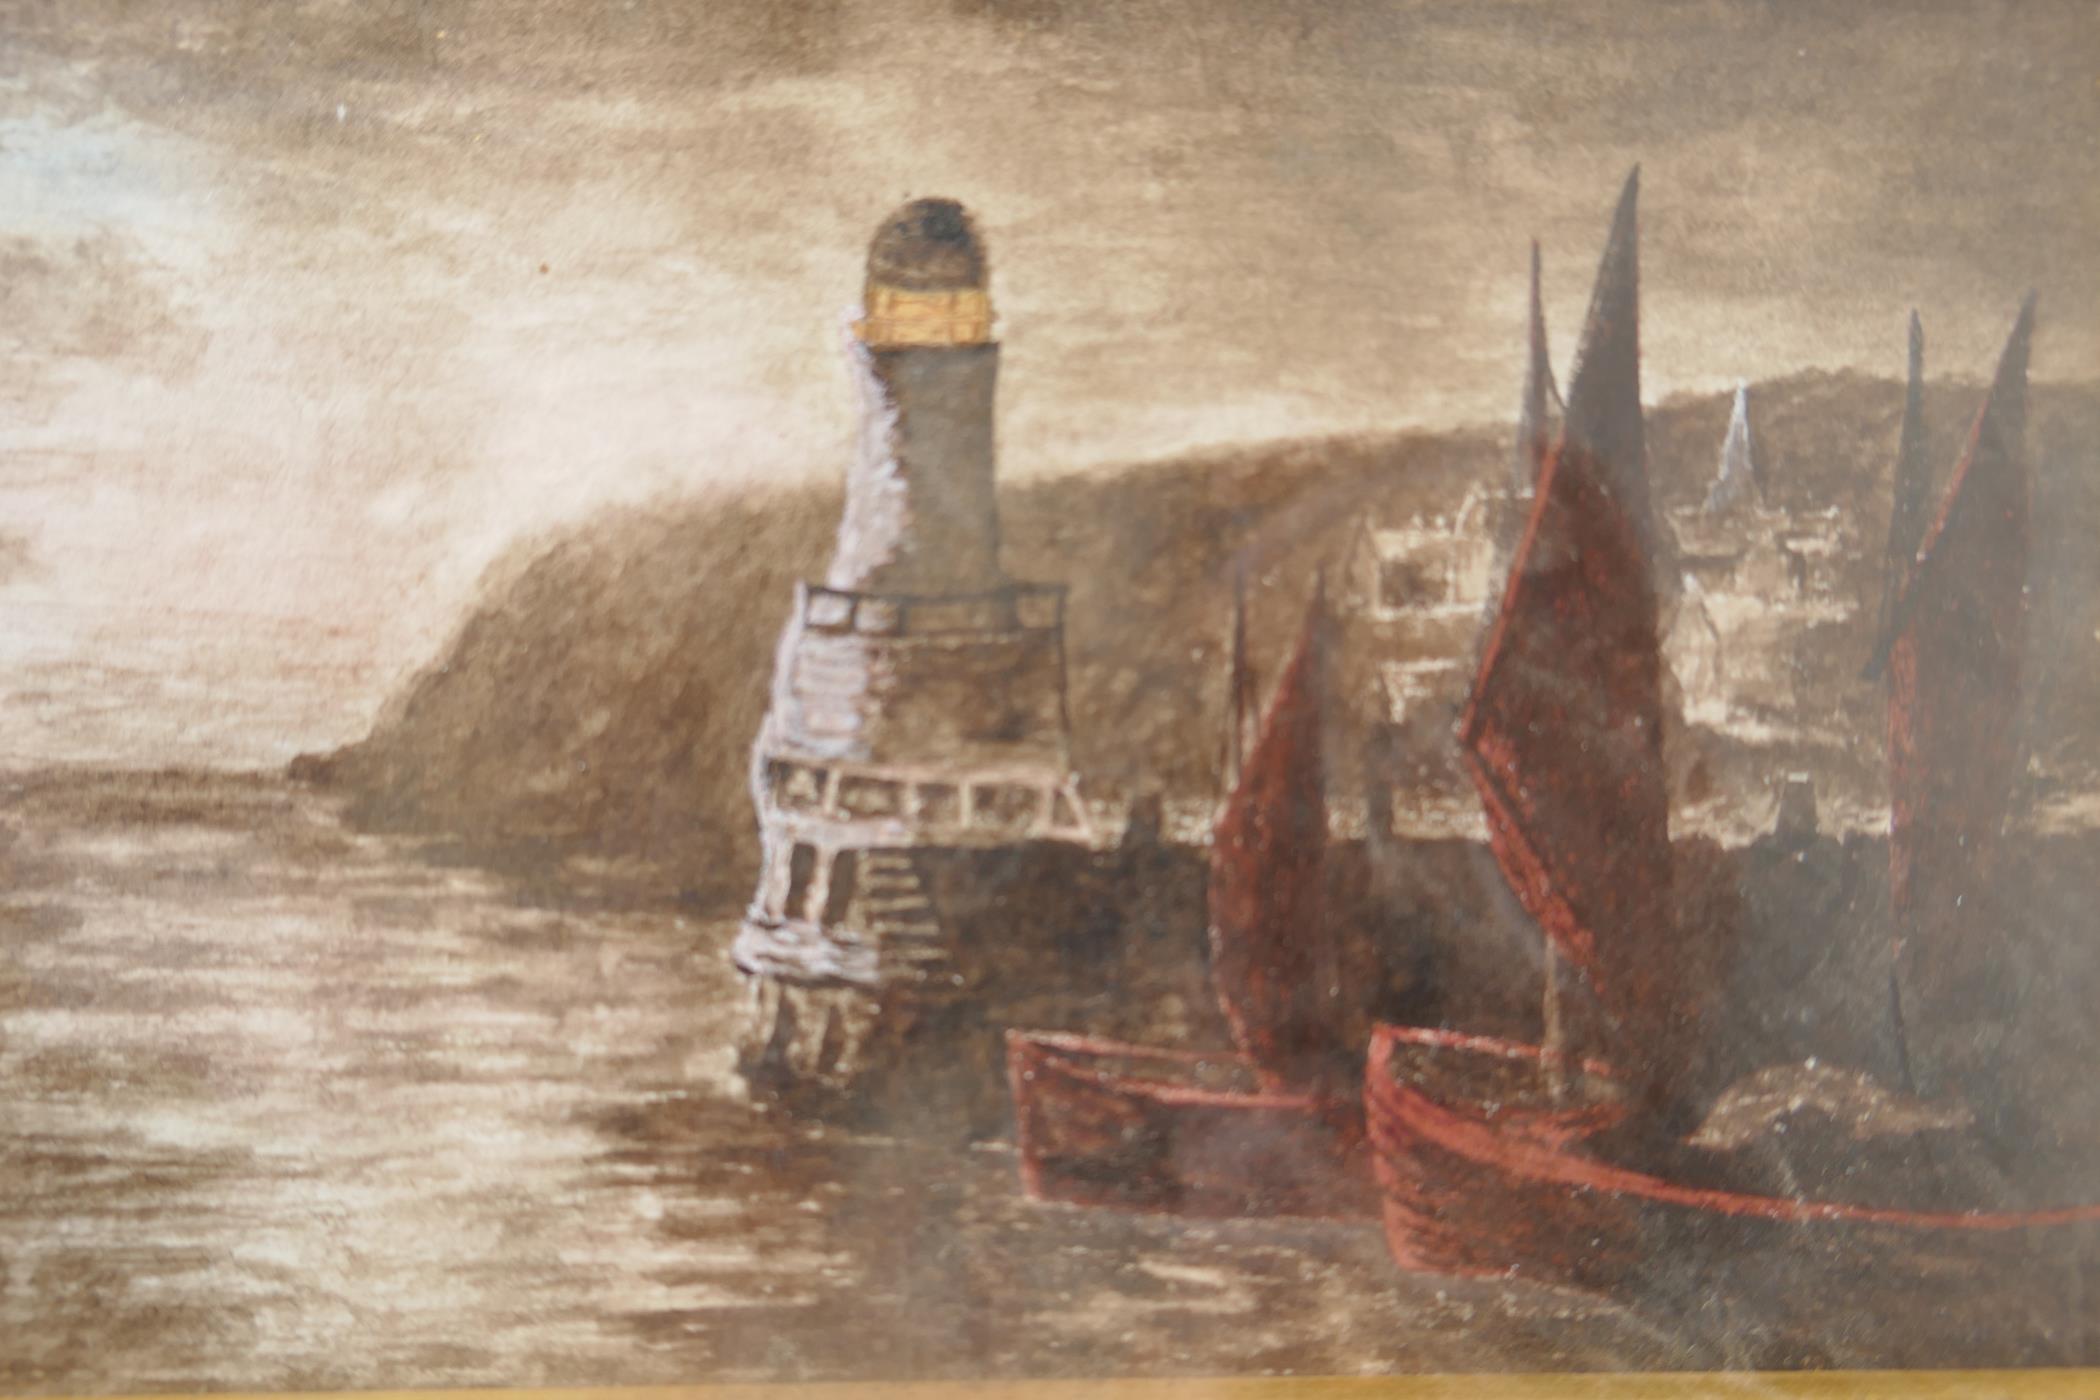 Venice Lagoon, by F. Crane, watercolour, 5 ½" x 3½", a coastal scene at night with lighthouse, - Image 2 of 4